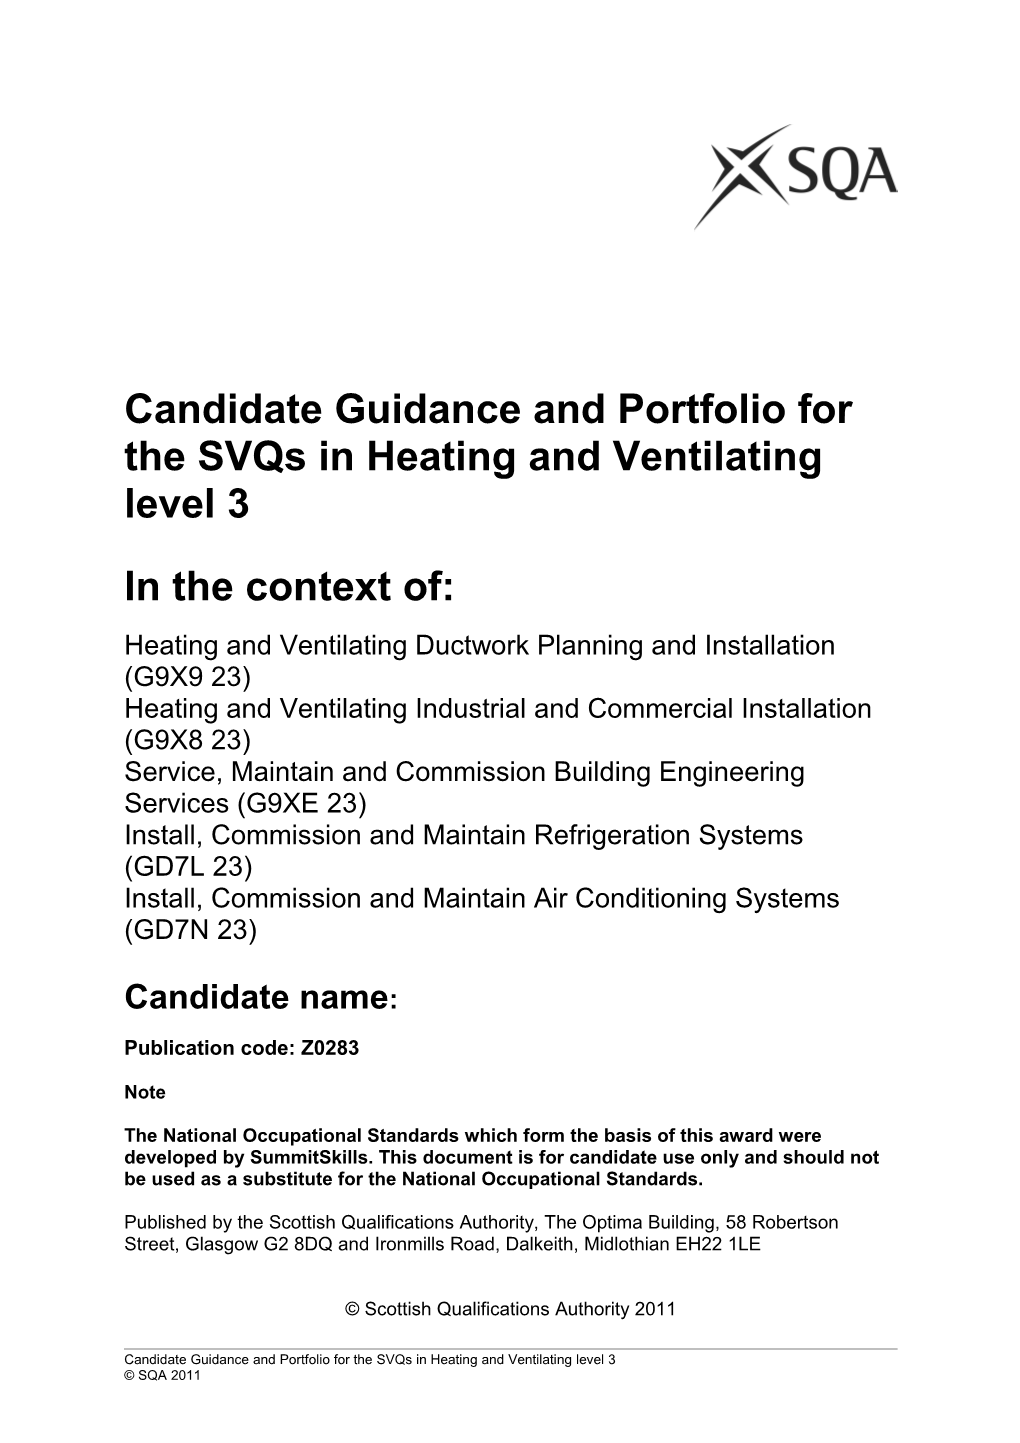 Candidate Guidance and Portfolio for the Svqs in Heating and Ventilating Level 3